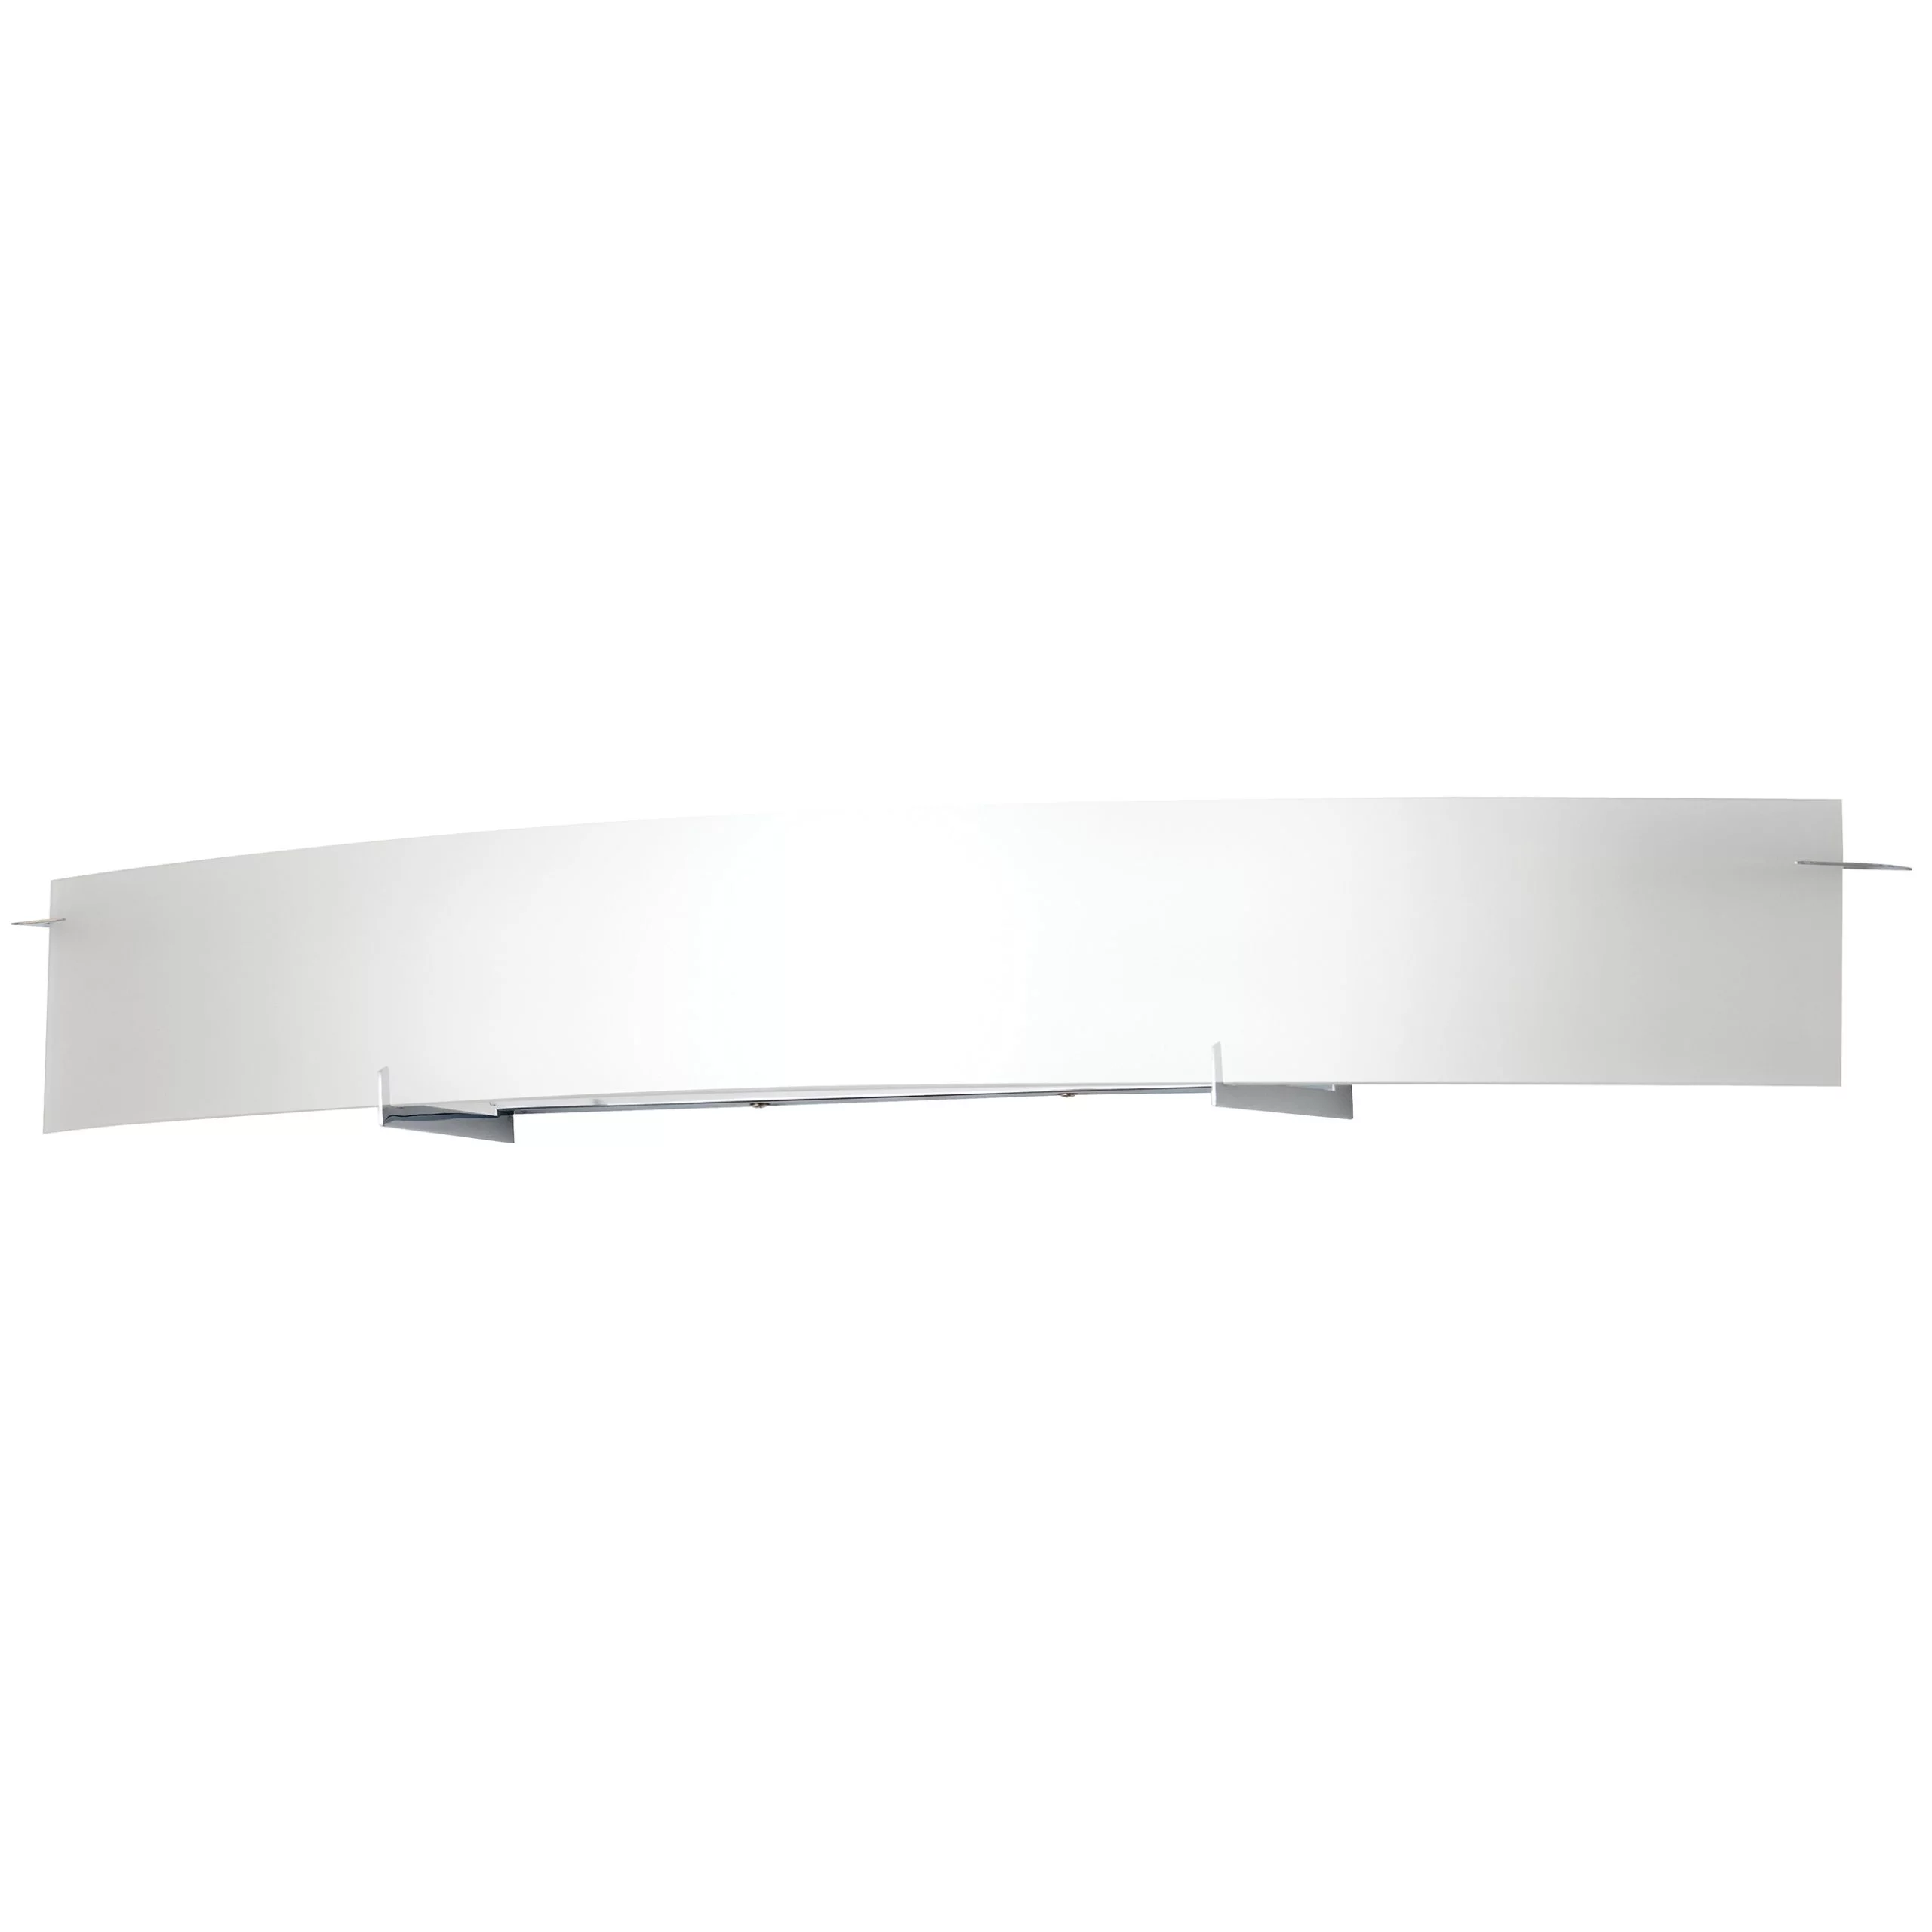 48"W Polished Chrome Vanity Light with Frosted Glass Shade